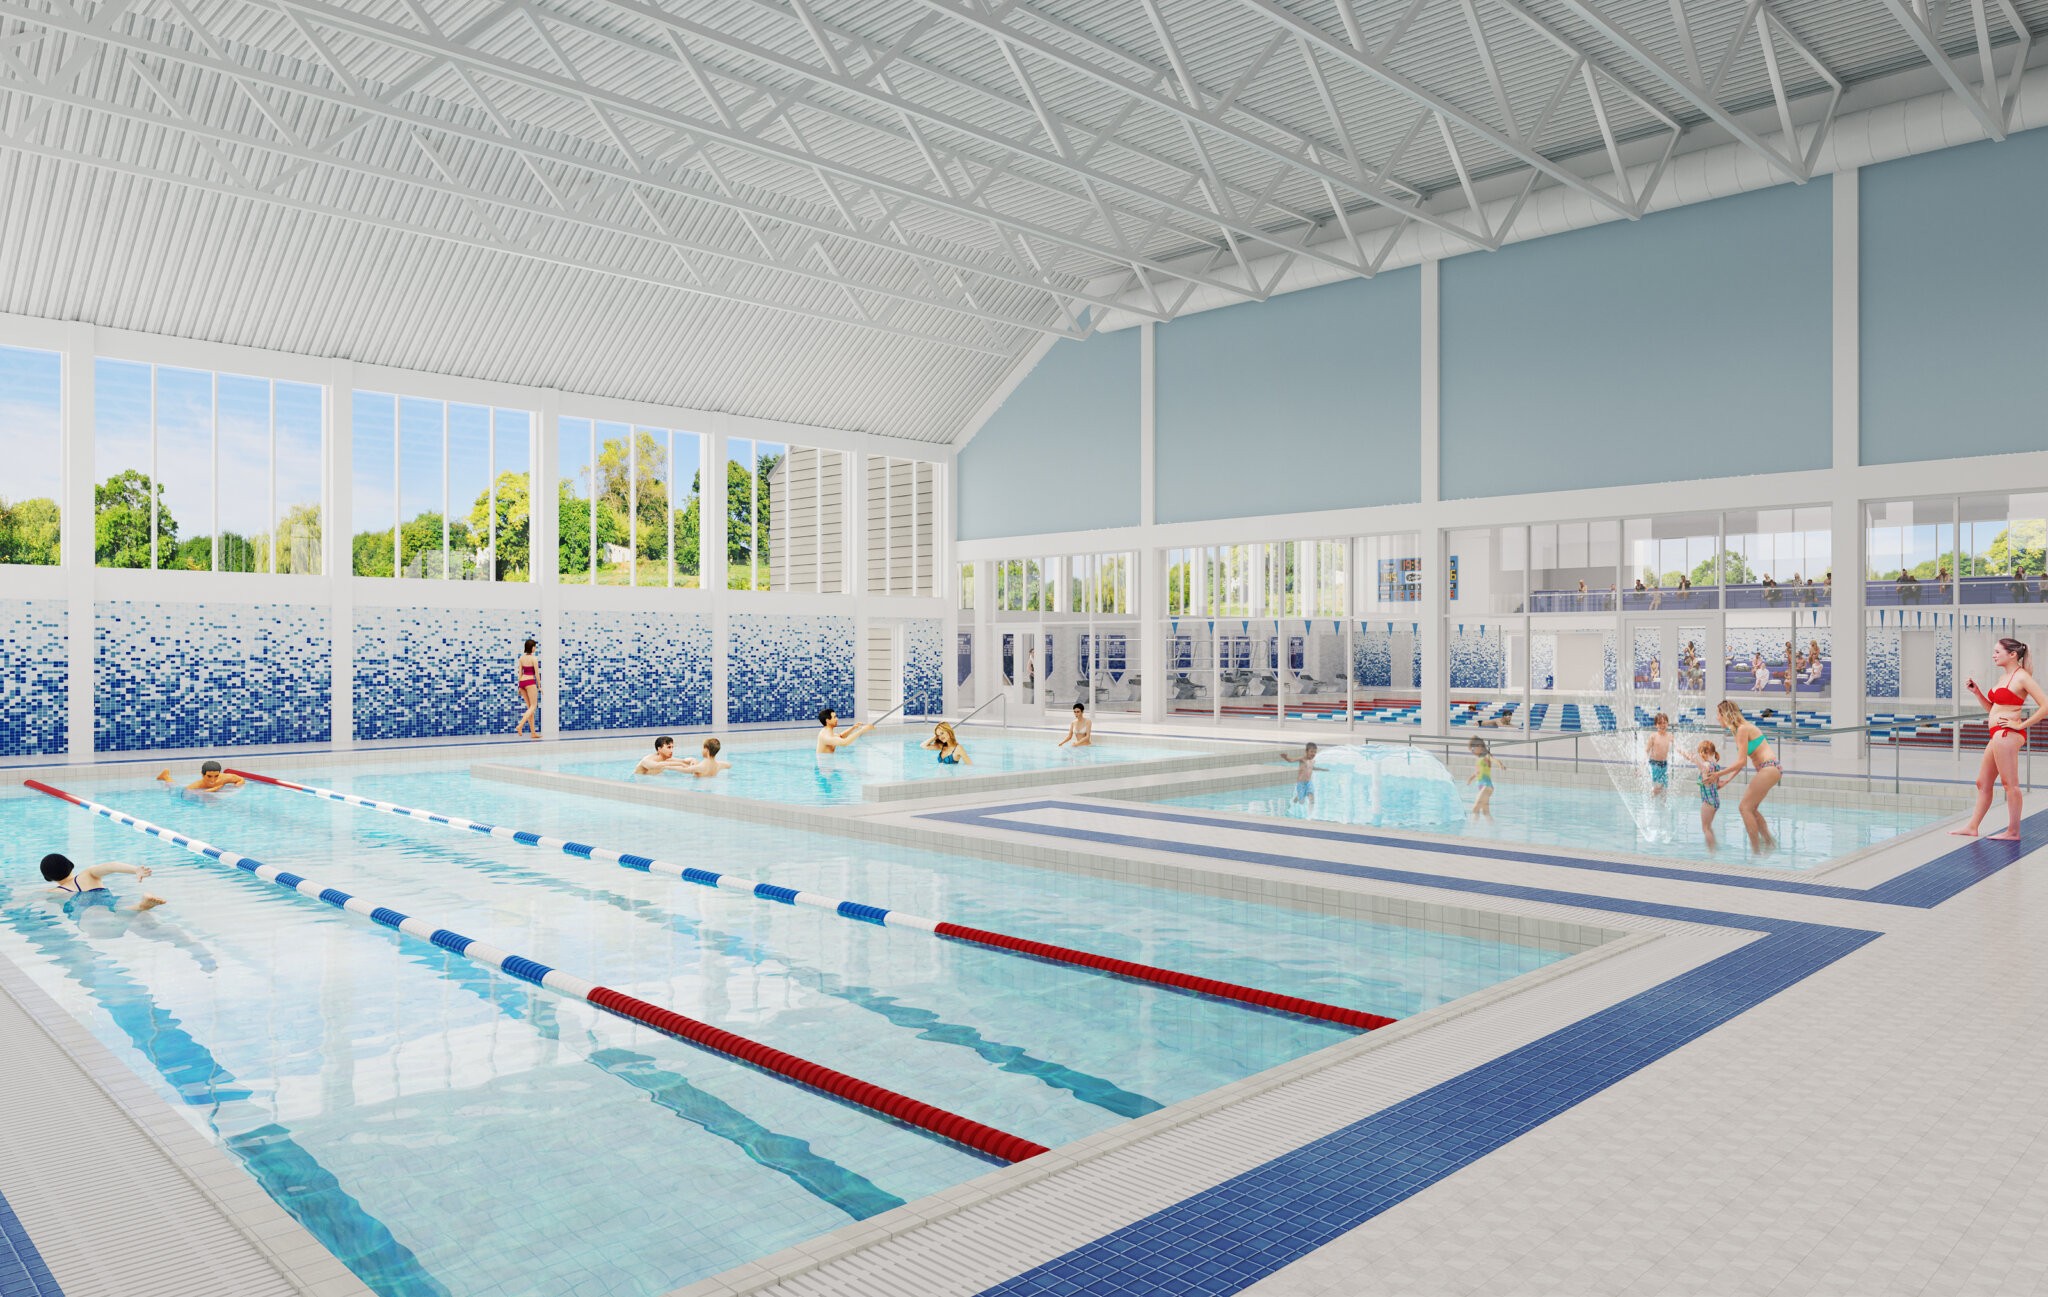 The STAR AquaCenter will have two indoor pools in Southampton